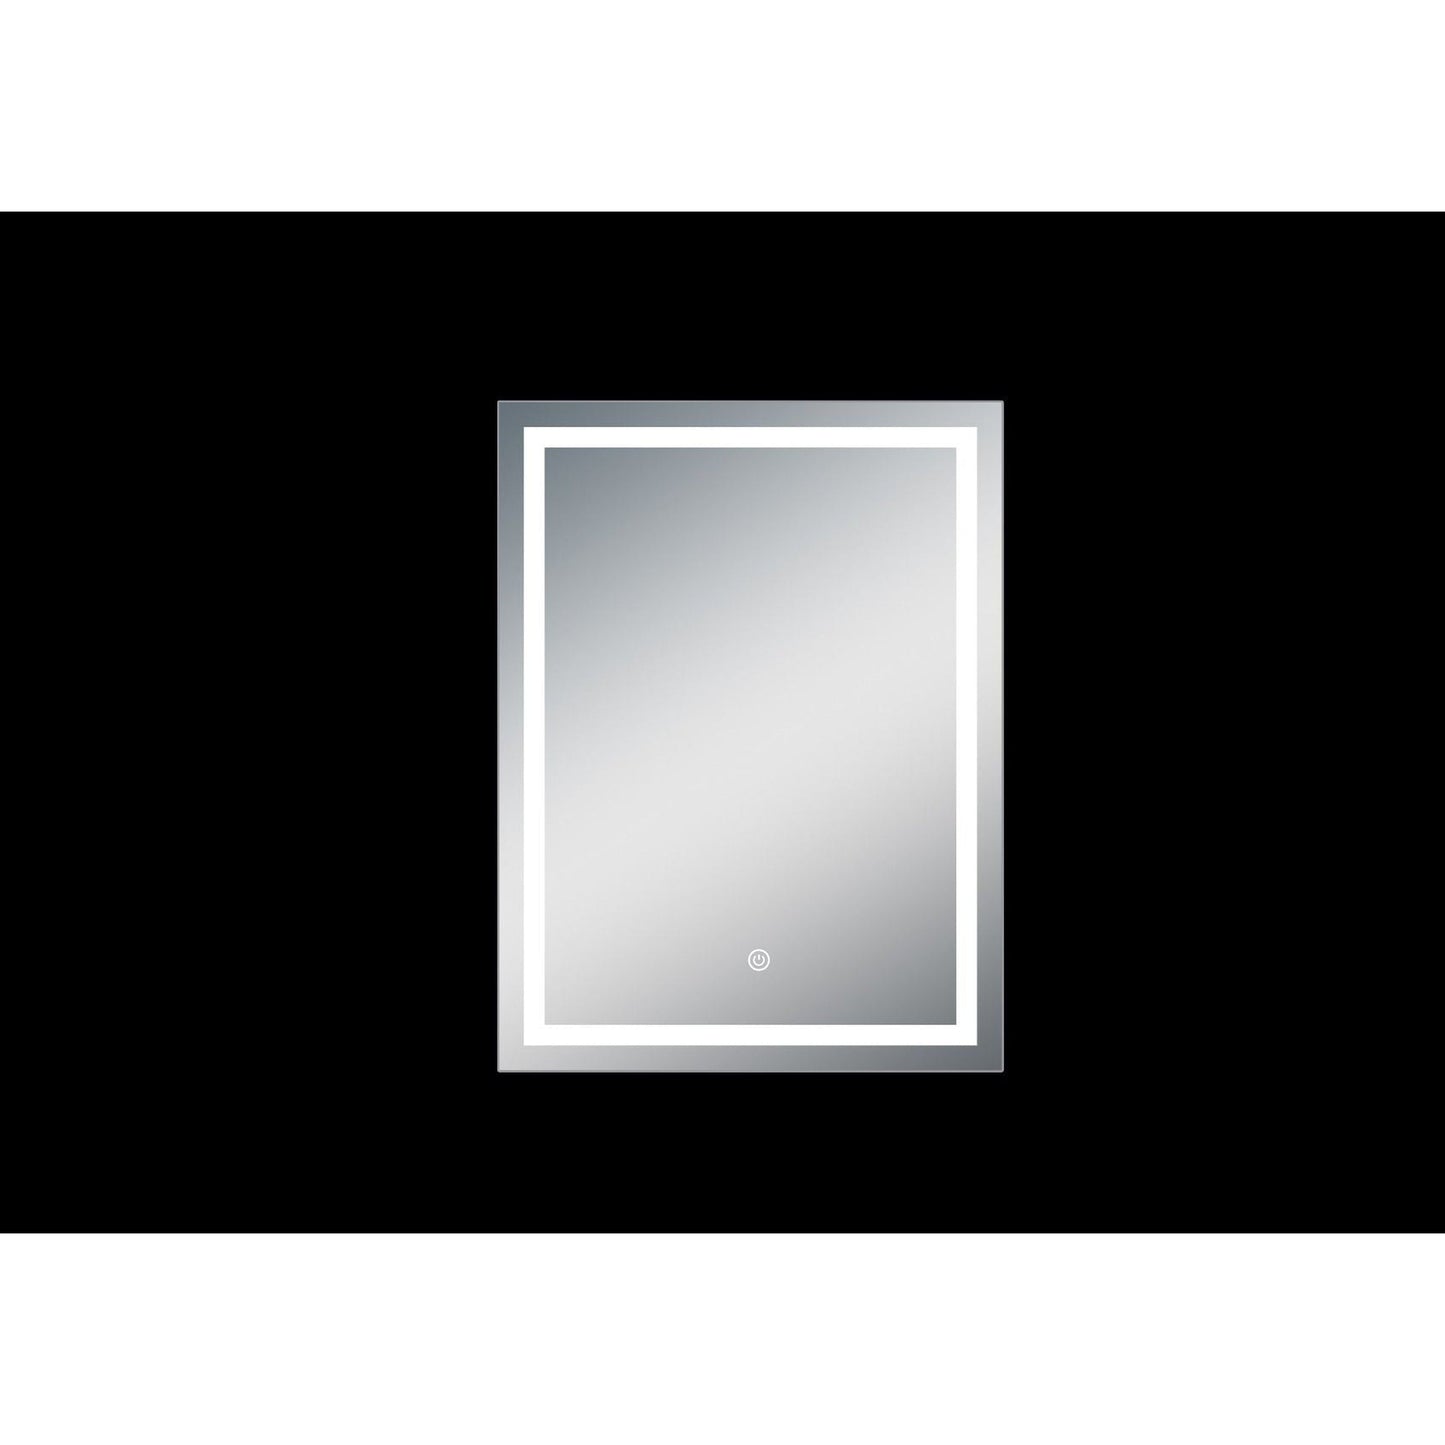 DreamWerks Riga 24" W x 32" H LED Mirror with Dimmer and Defogger